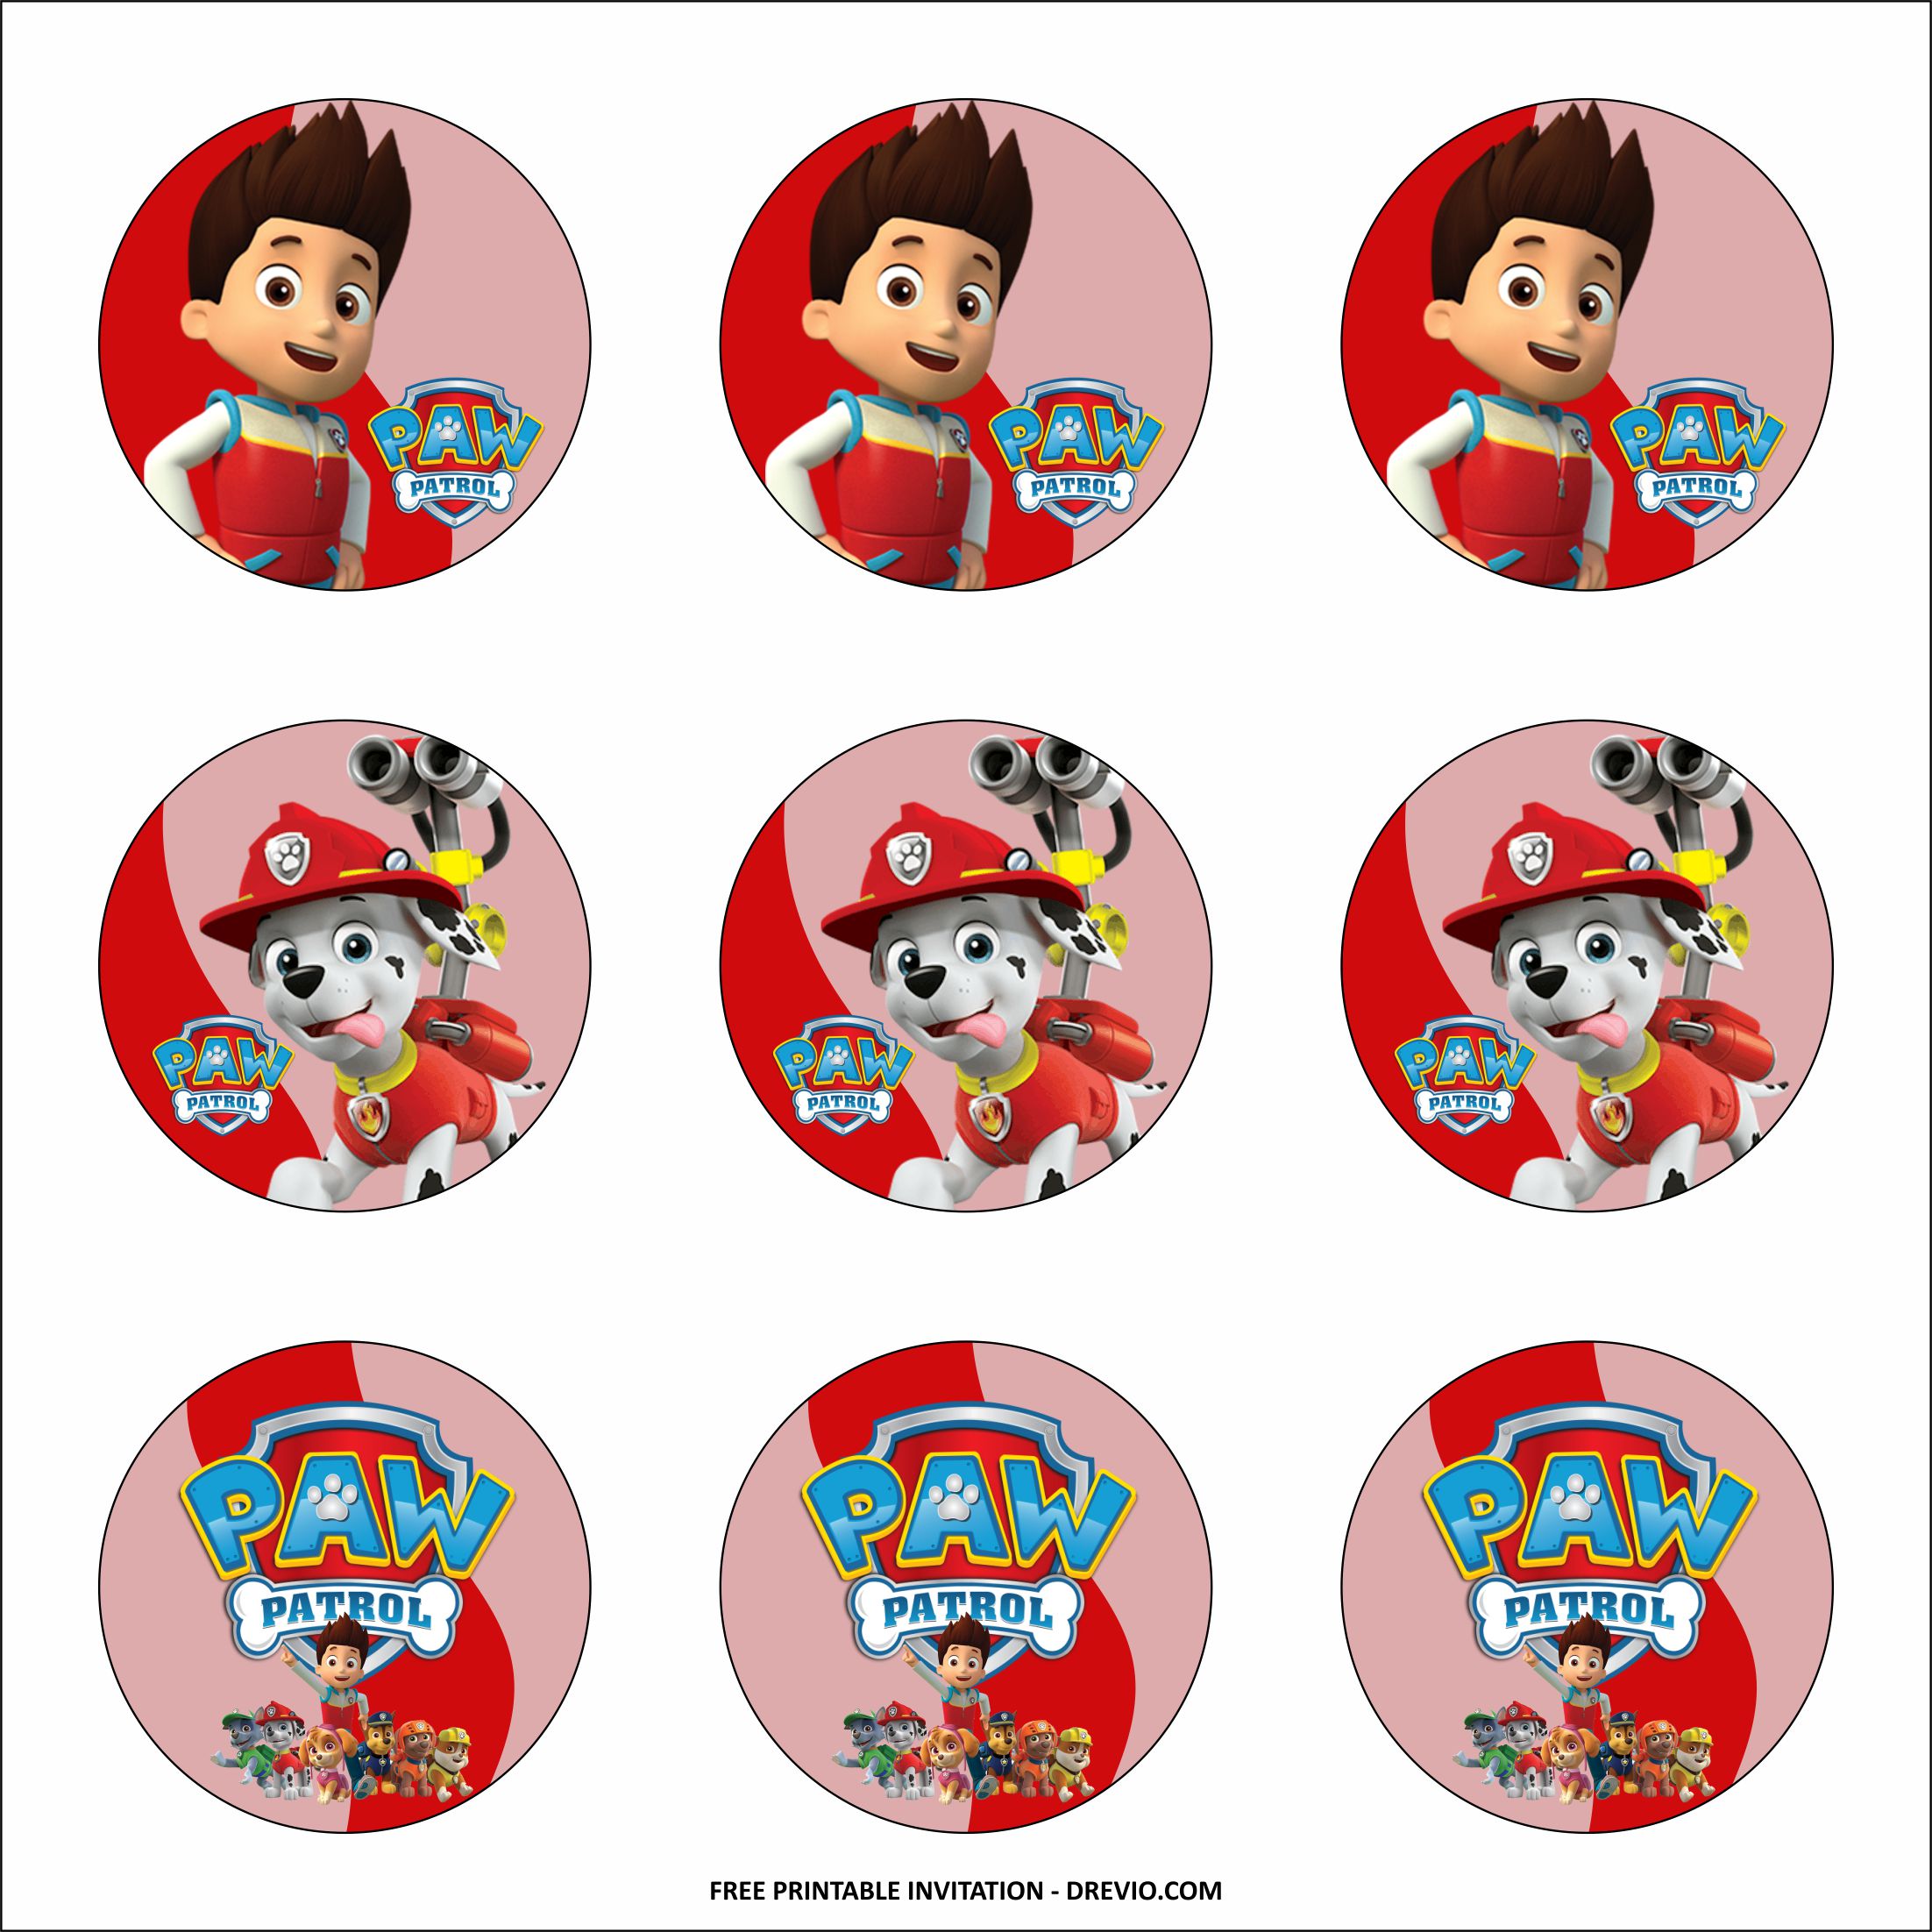 paw-patrol-cupcake-toppers-templates-download-hundreds-free-printable-birthday-invitation